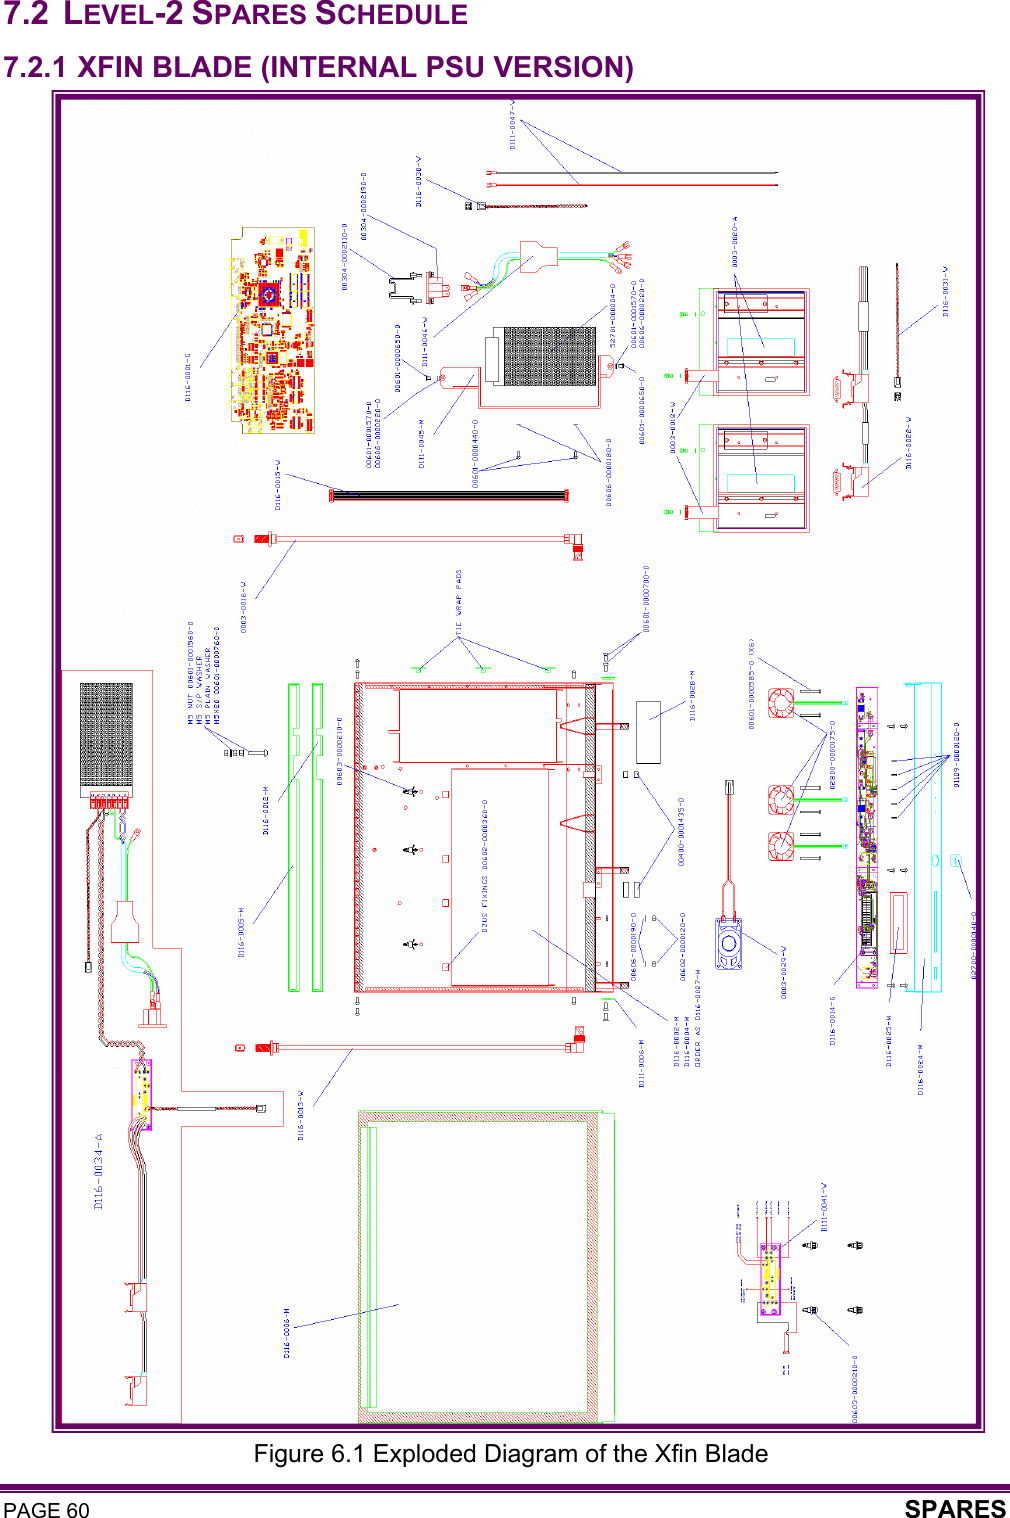 PAGE 60  SPARES  7.2 LEVEL-2 SPARES SCHEDULE 7.2.1 XFIN BLADE (INTERNAL PSU VERSION)                                  Figure 6.1 Exploded Diagram of the Xfin Blade 